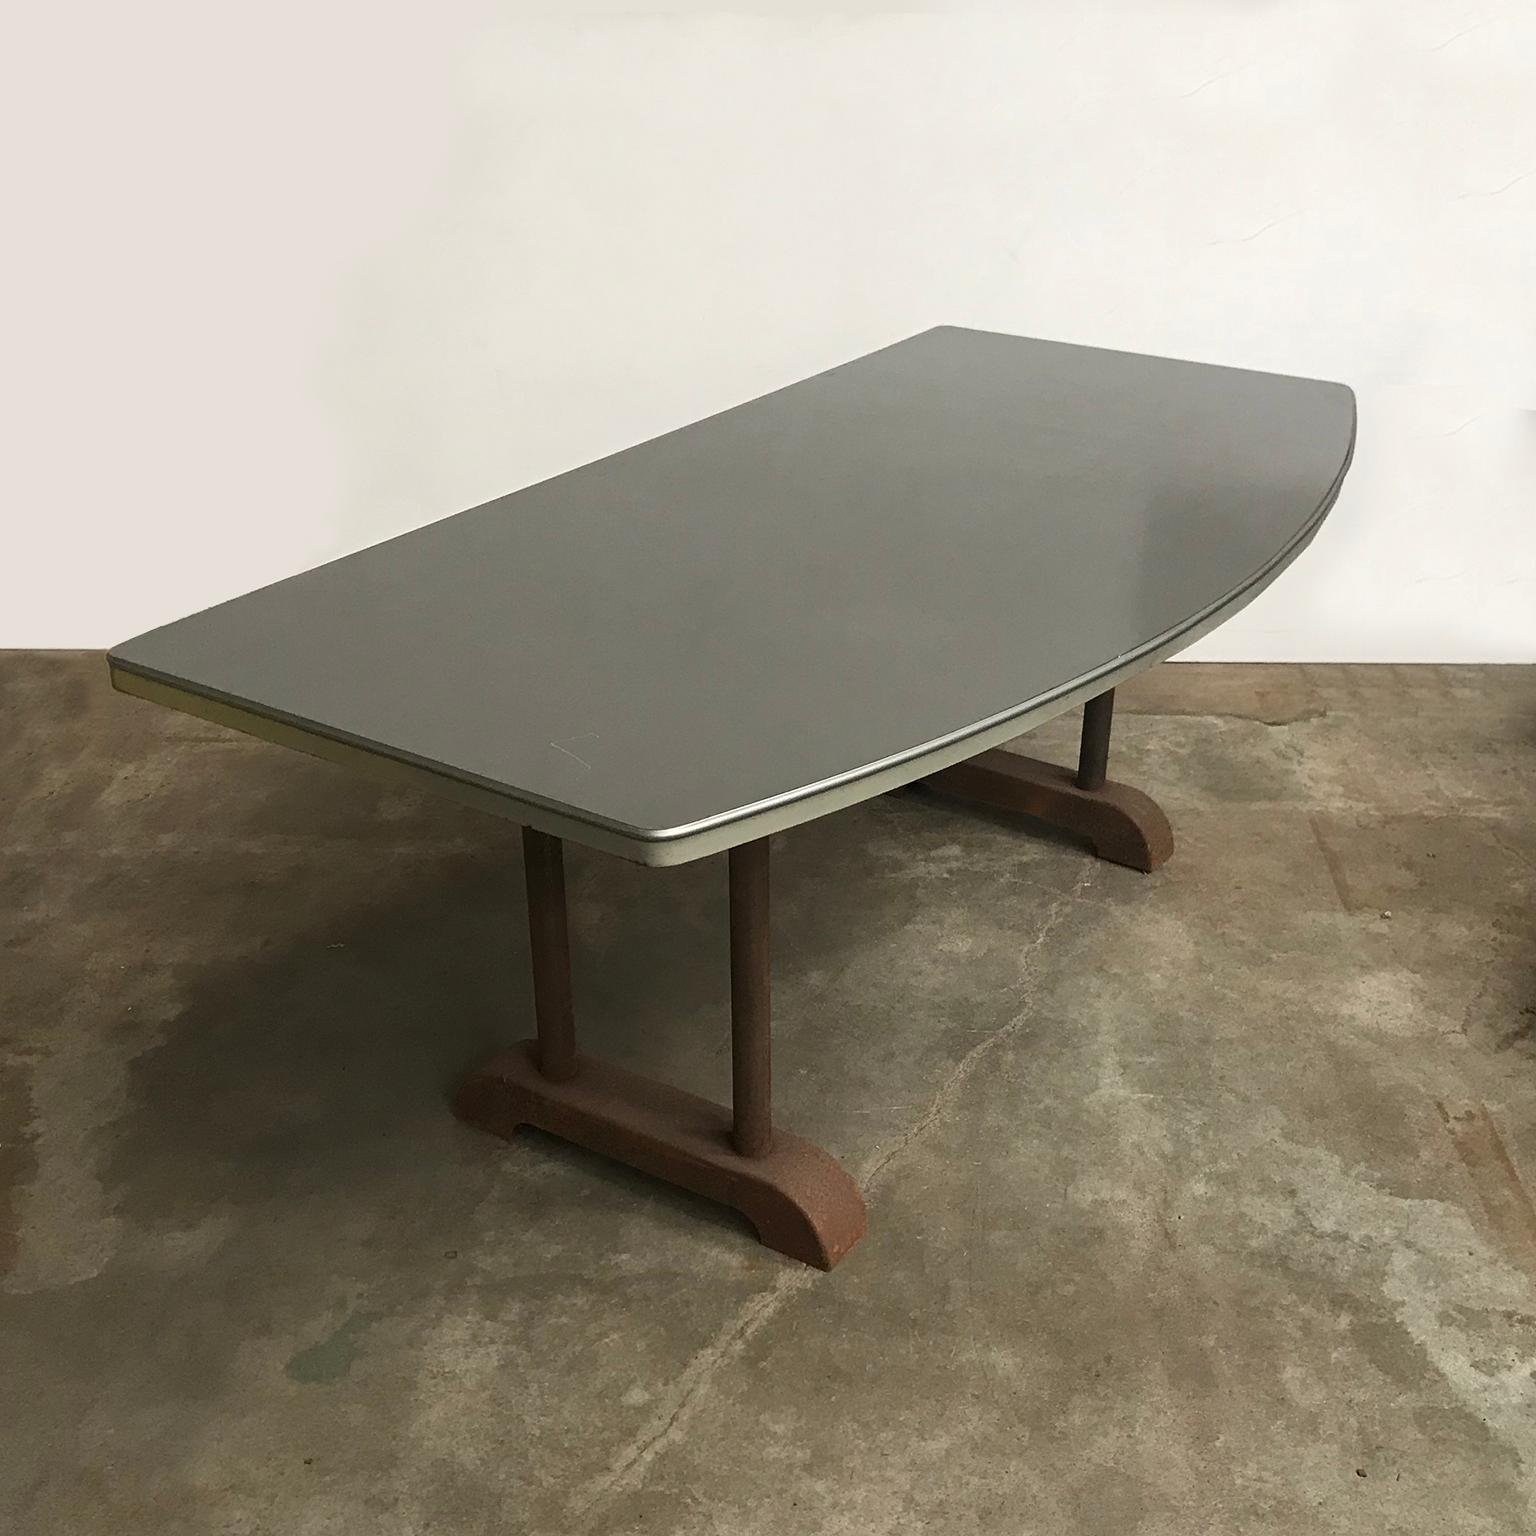 Mid-Century Modern Industrial Reception Table with Round Curve in Top / Only Top Six Hundred Euro